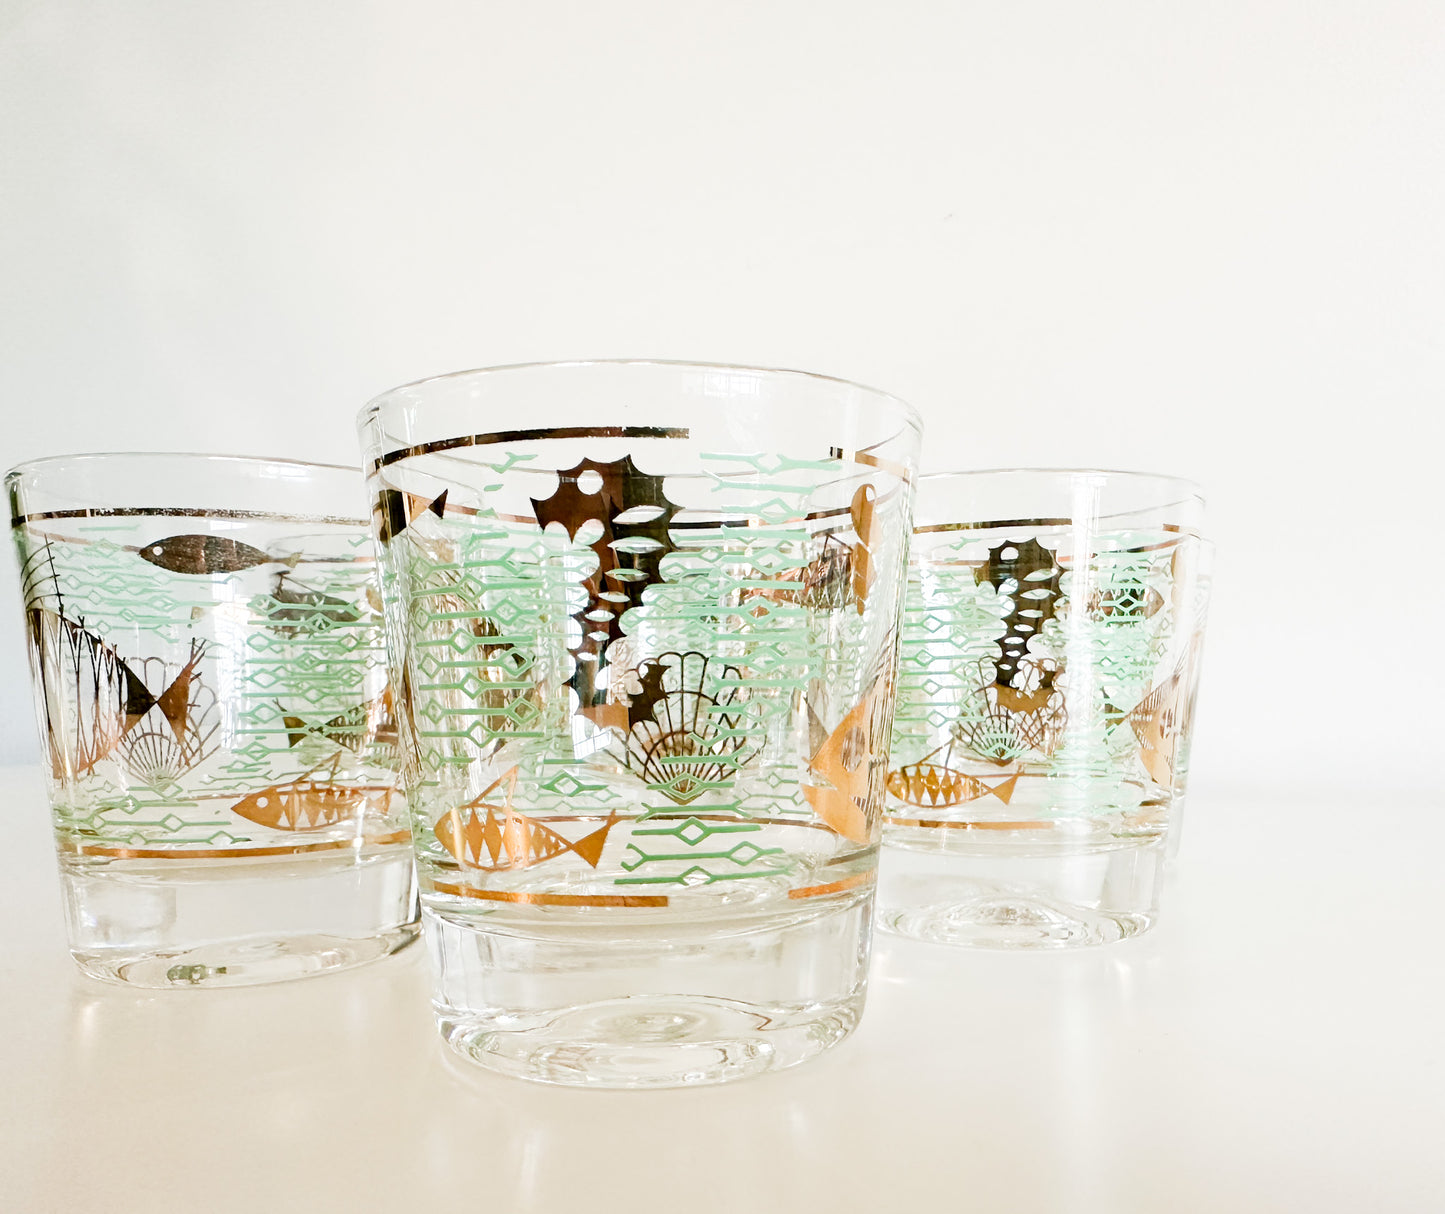 Set of 8 Libbey Glass Marine Life Cocktail Lowball Glasses| Vintage 1950s Barware